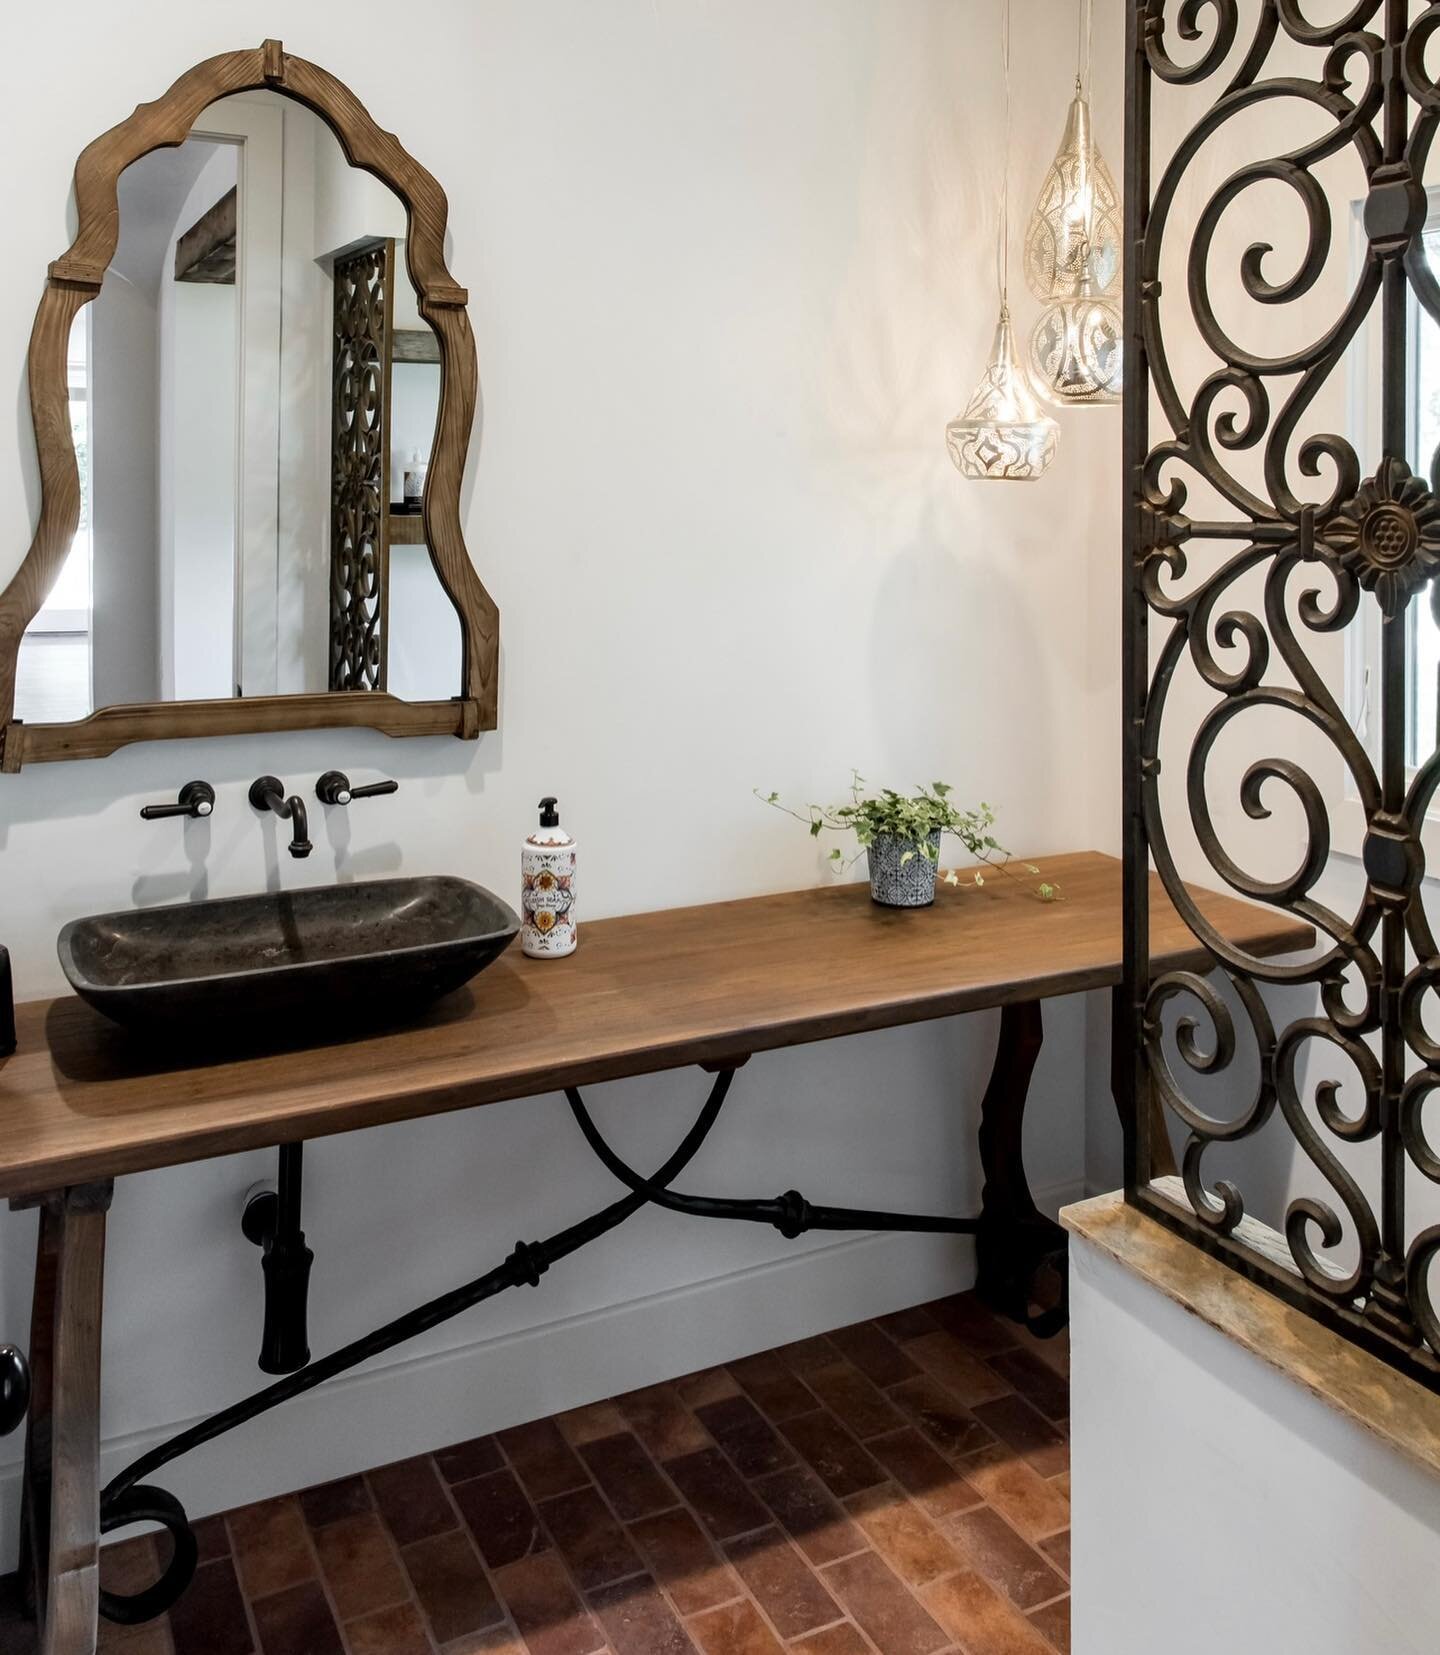 The powder bath is usually the smallest room in the house, but that doesn&rsquo;t mean it can&rsquo;t be big on style.  #luxuryhomes #powderroom #sanantoniodesigner #luxuryinteriordesigner #awardwinningdesign #traditionalhome #spanishhomes #vesselsin